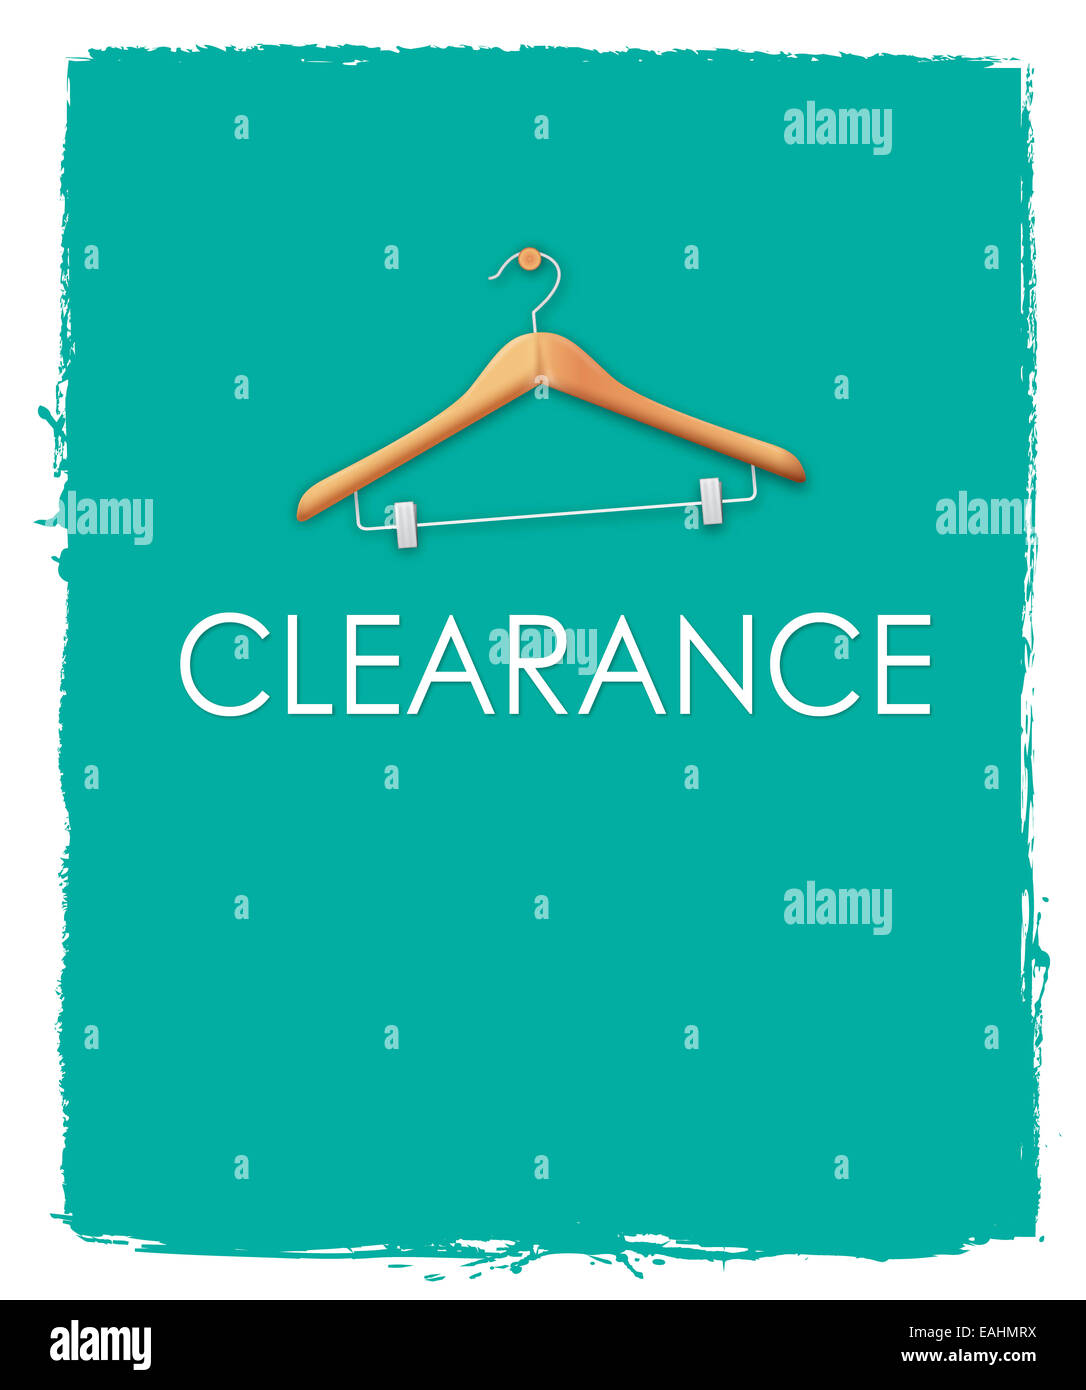 Stock clearance Cut Out Stock Images & Pictures - Alamy